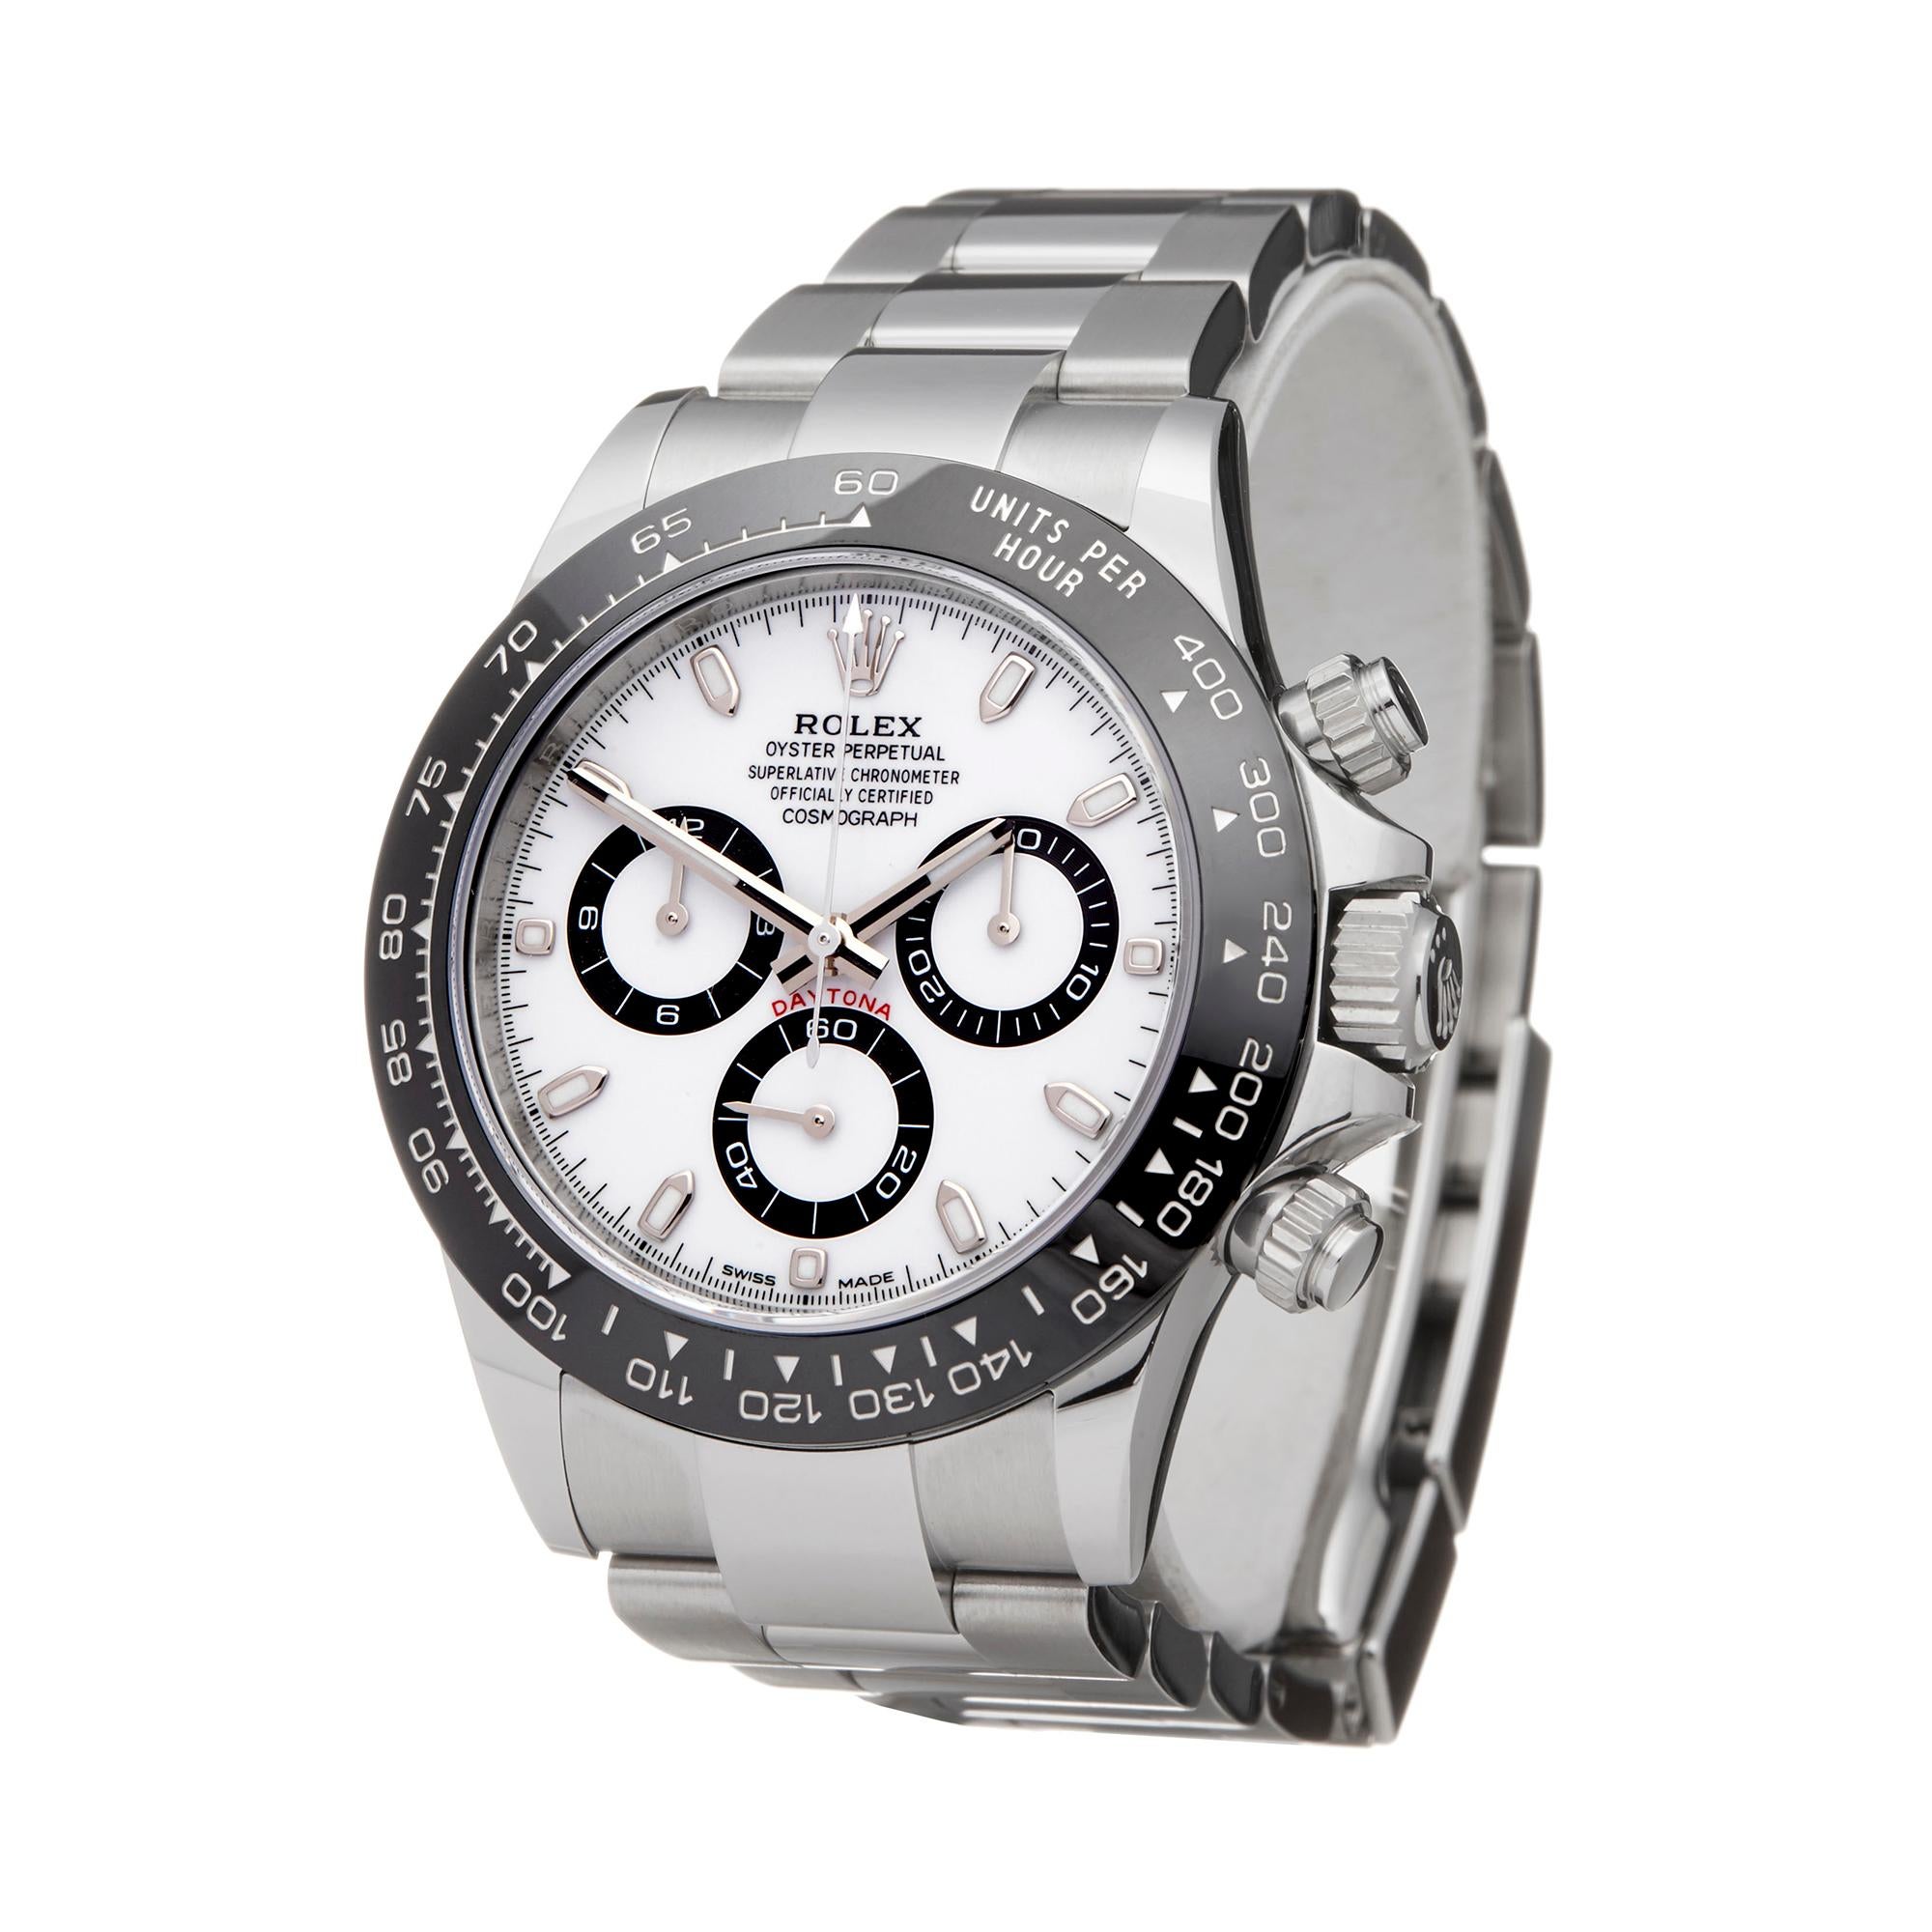 Reference: W6127
Manufacturer: Rolex
Model: Daytona
Model Reference: 116500LN
Age: 17th February 2019
Gender: Men's
Box and Papers: Box, Manuals, Guarantee & Swing Tags
Dial: White Baton
Glass: Sapphire Crystal
Movement: Automatic
Water Resistance: